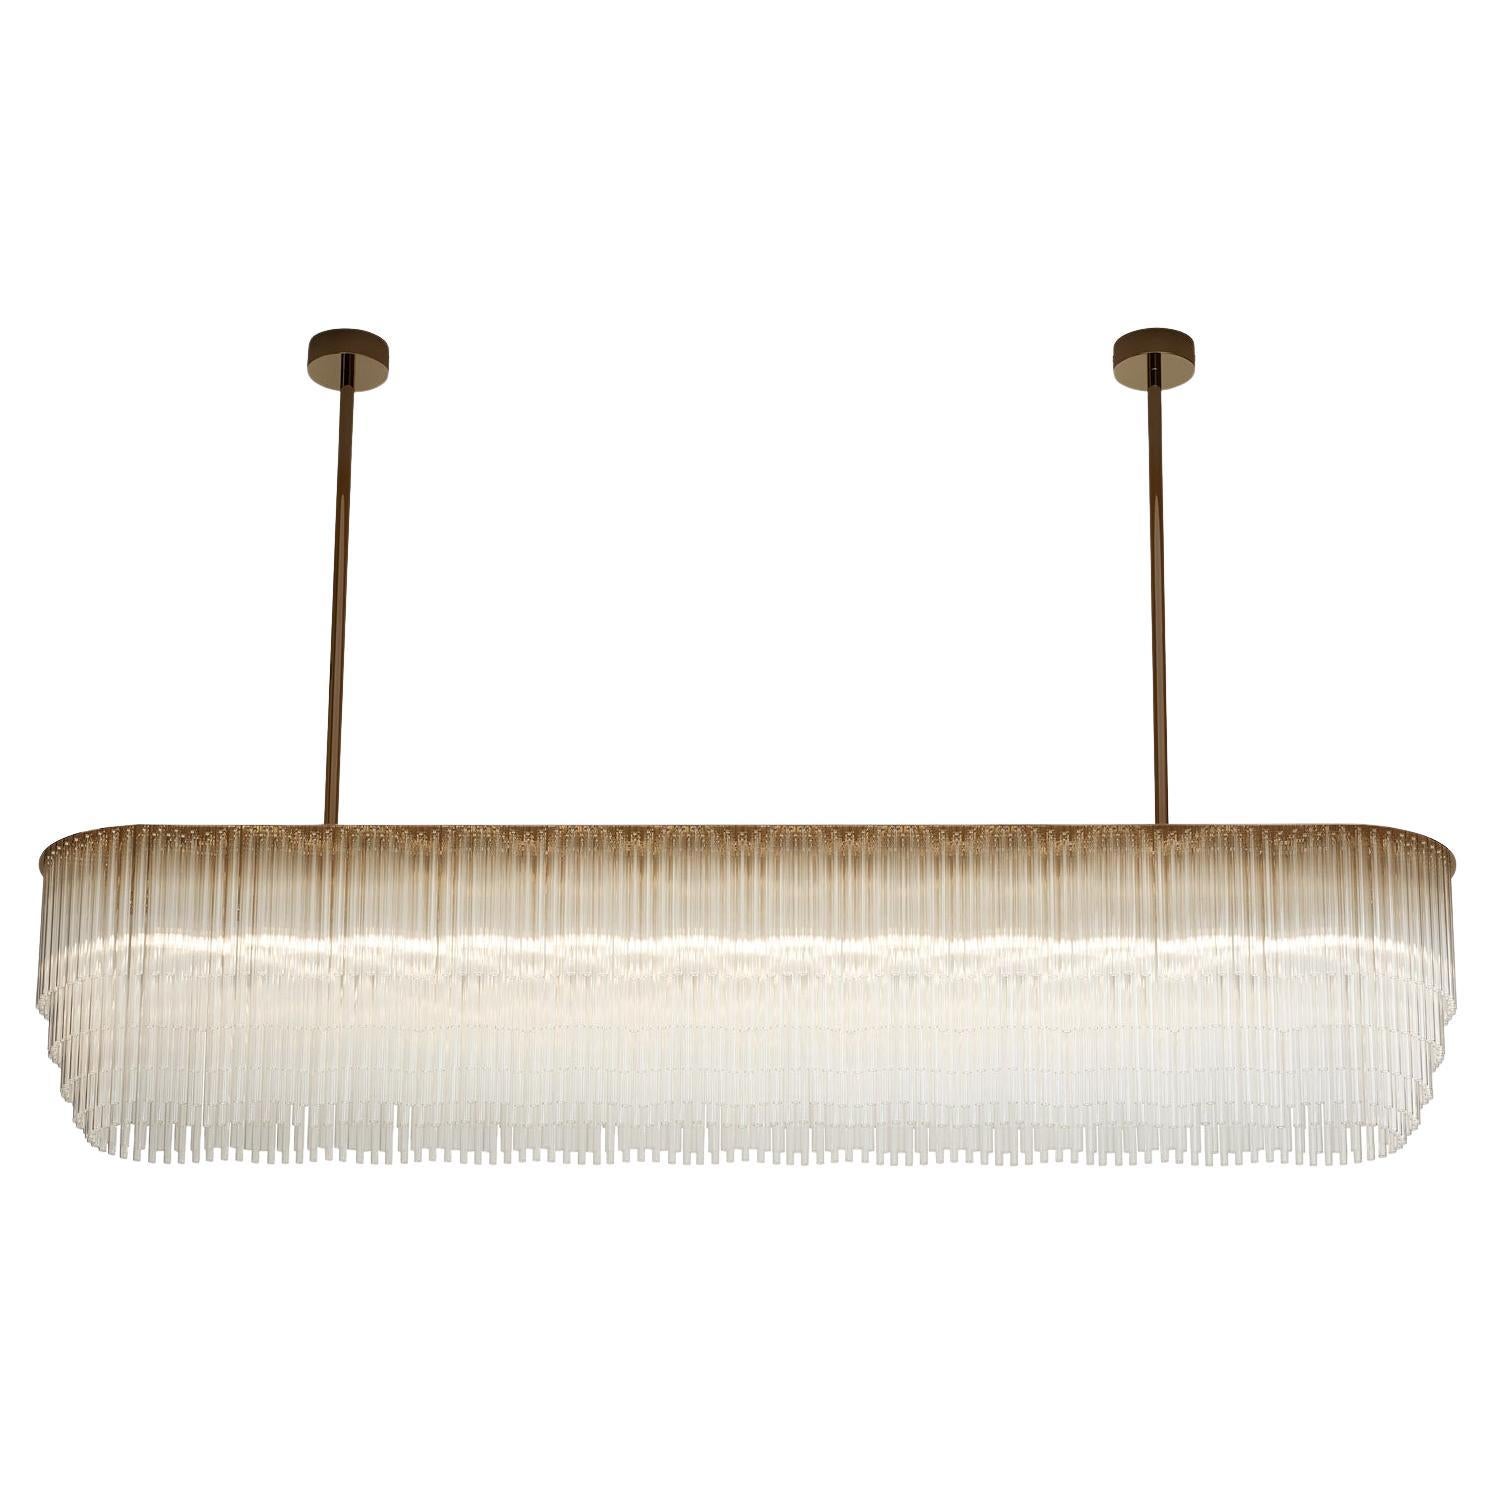 Linear Chandelier 1261mm / 25.75" in Brass-based Bronze and Tiered Glass Profile For Sale